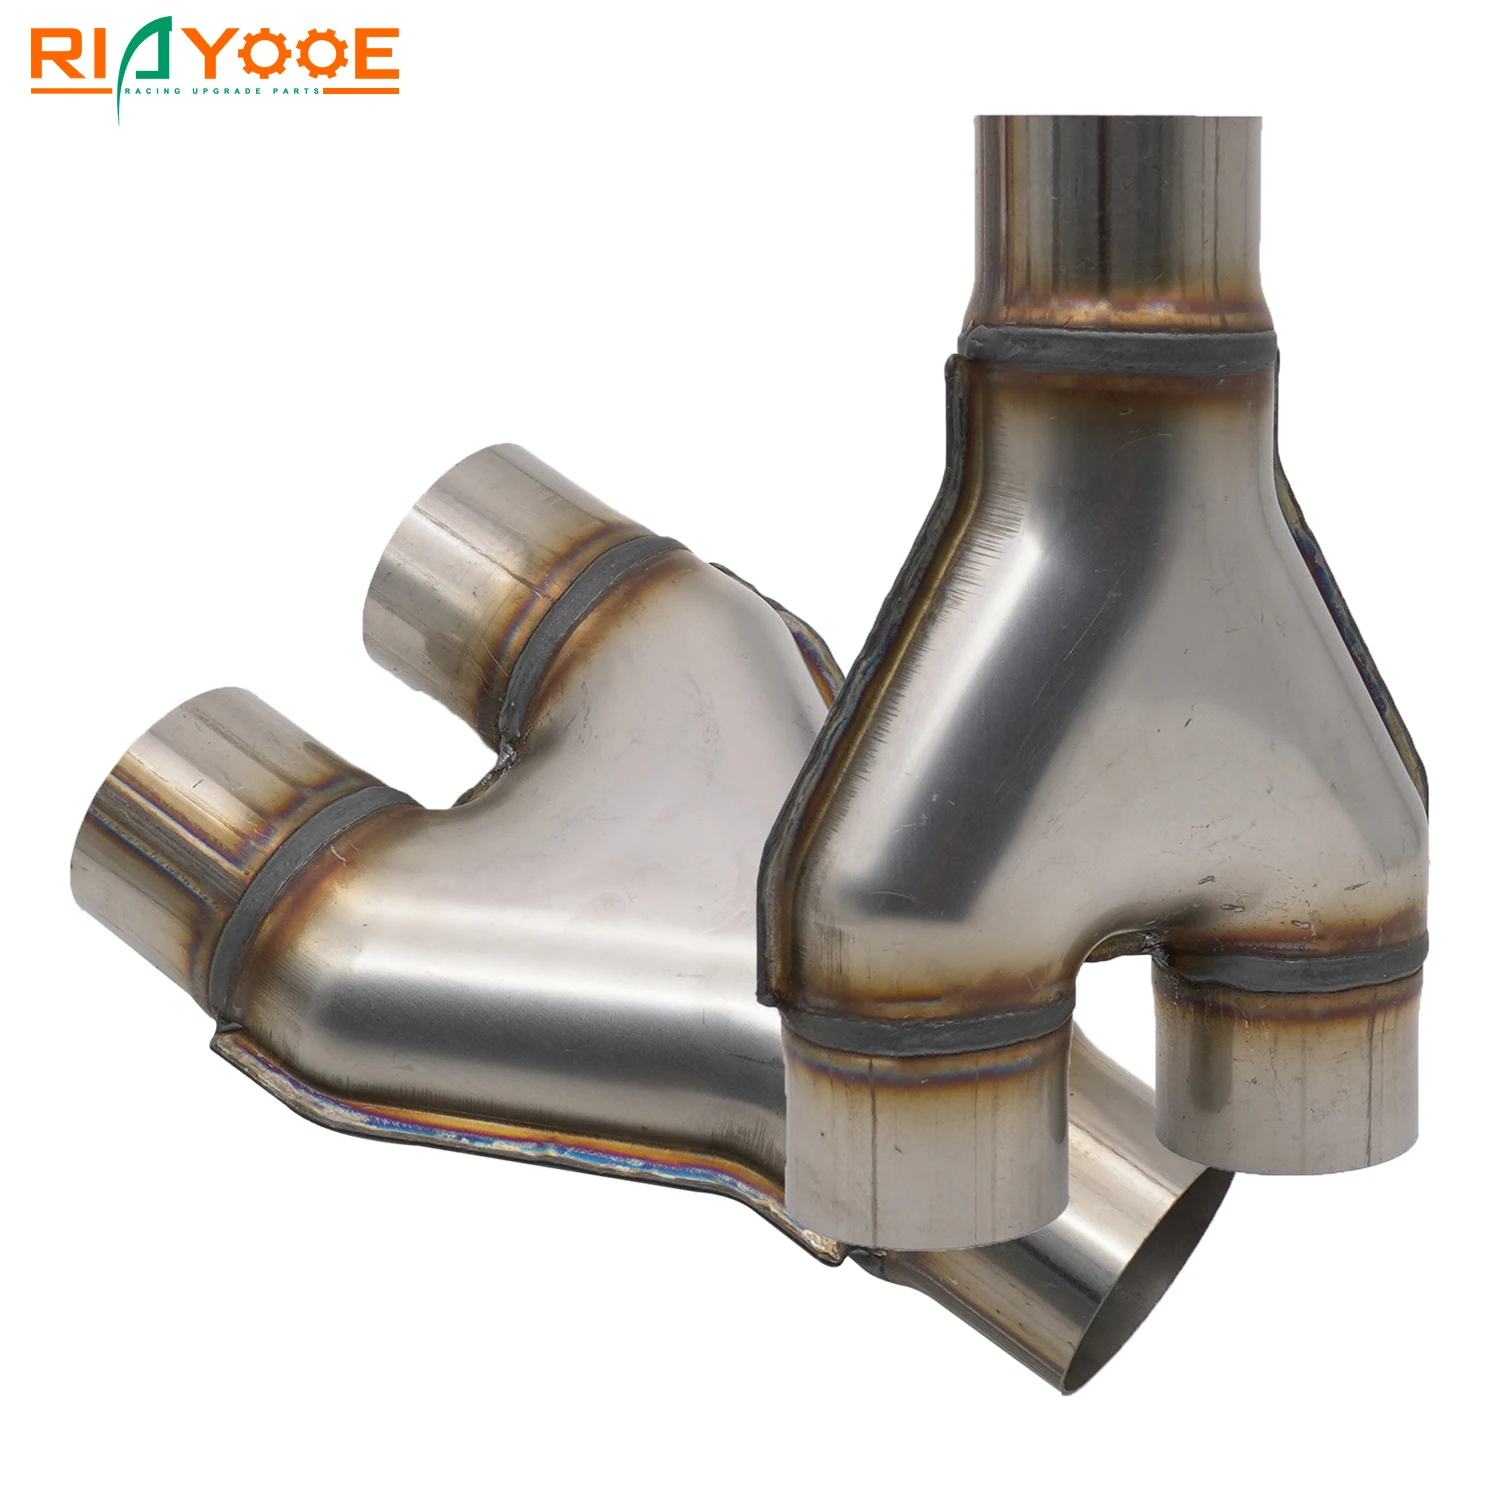 

Car Exhaust Y Pipe 2" 2.25" 2.5" 3" Inlet 3-Way 409 Stainless Steel 51 57 63 76MM Outlet for Universal Exhaust Muffler Y Tube